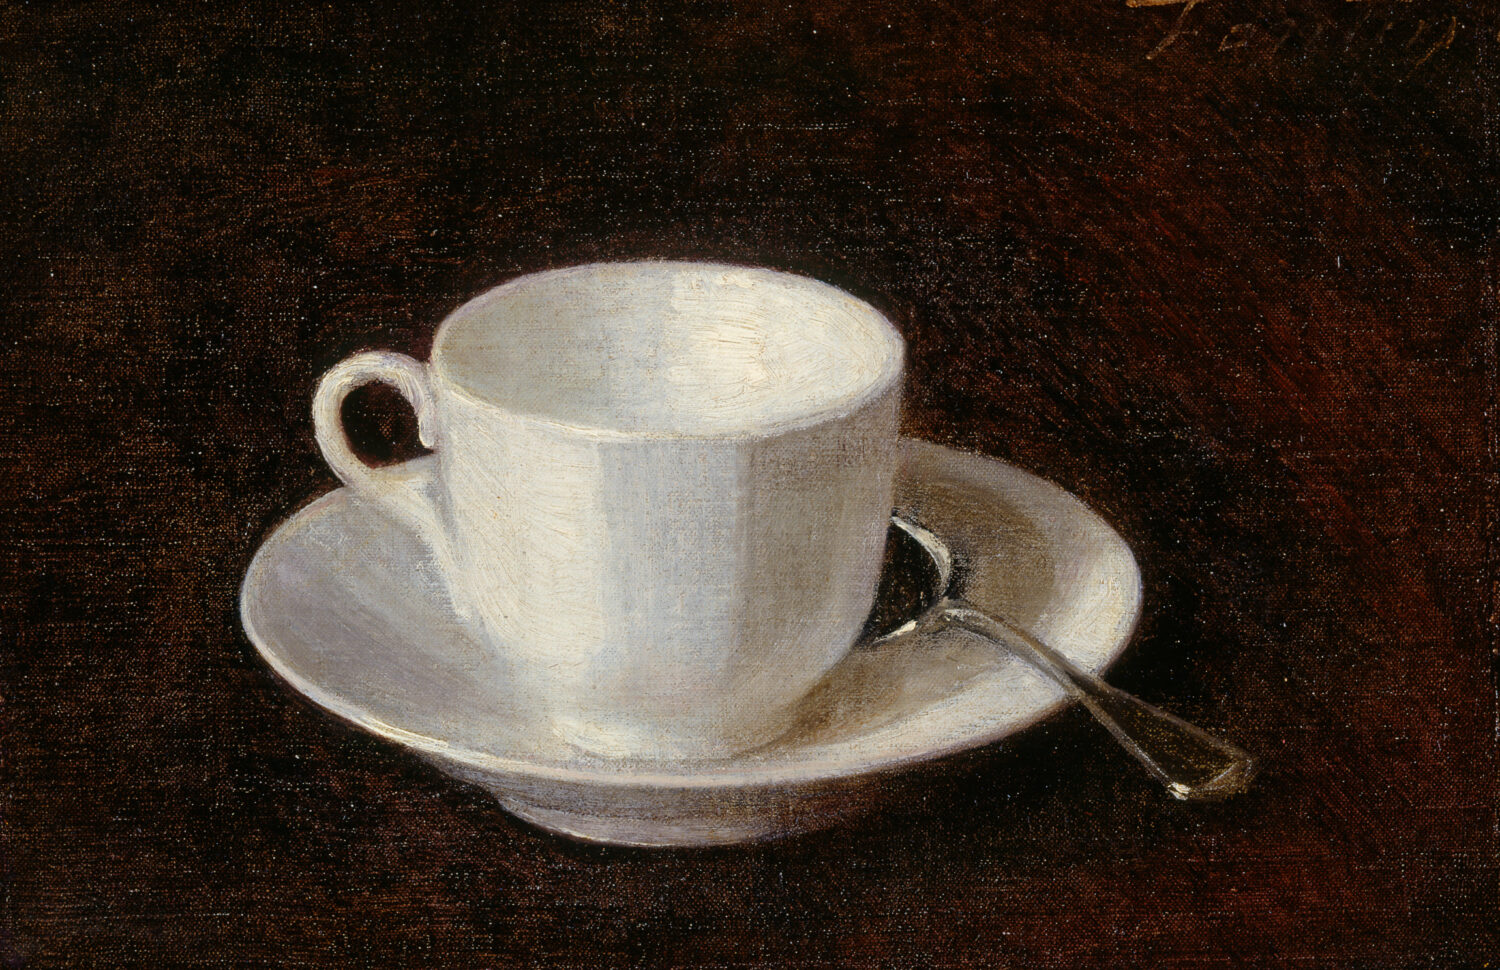 A painting of a white tea cup on a white saucer witha silver spoon. These three things are against a dark brown background.